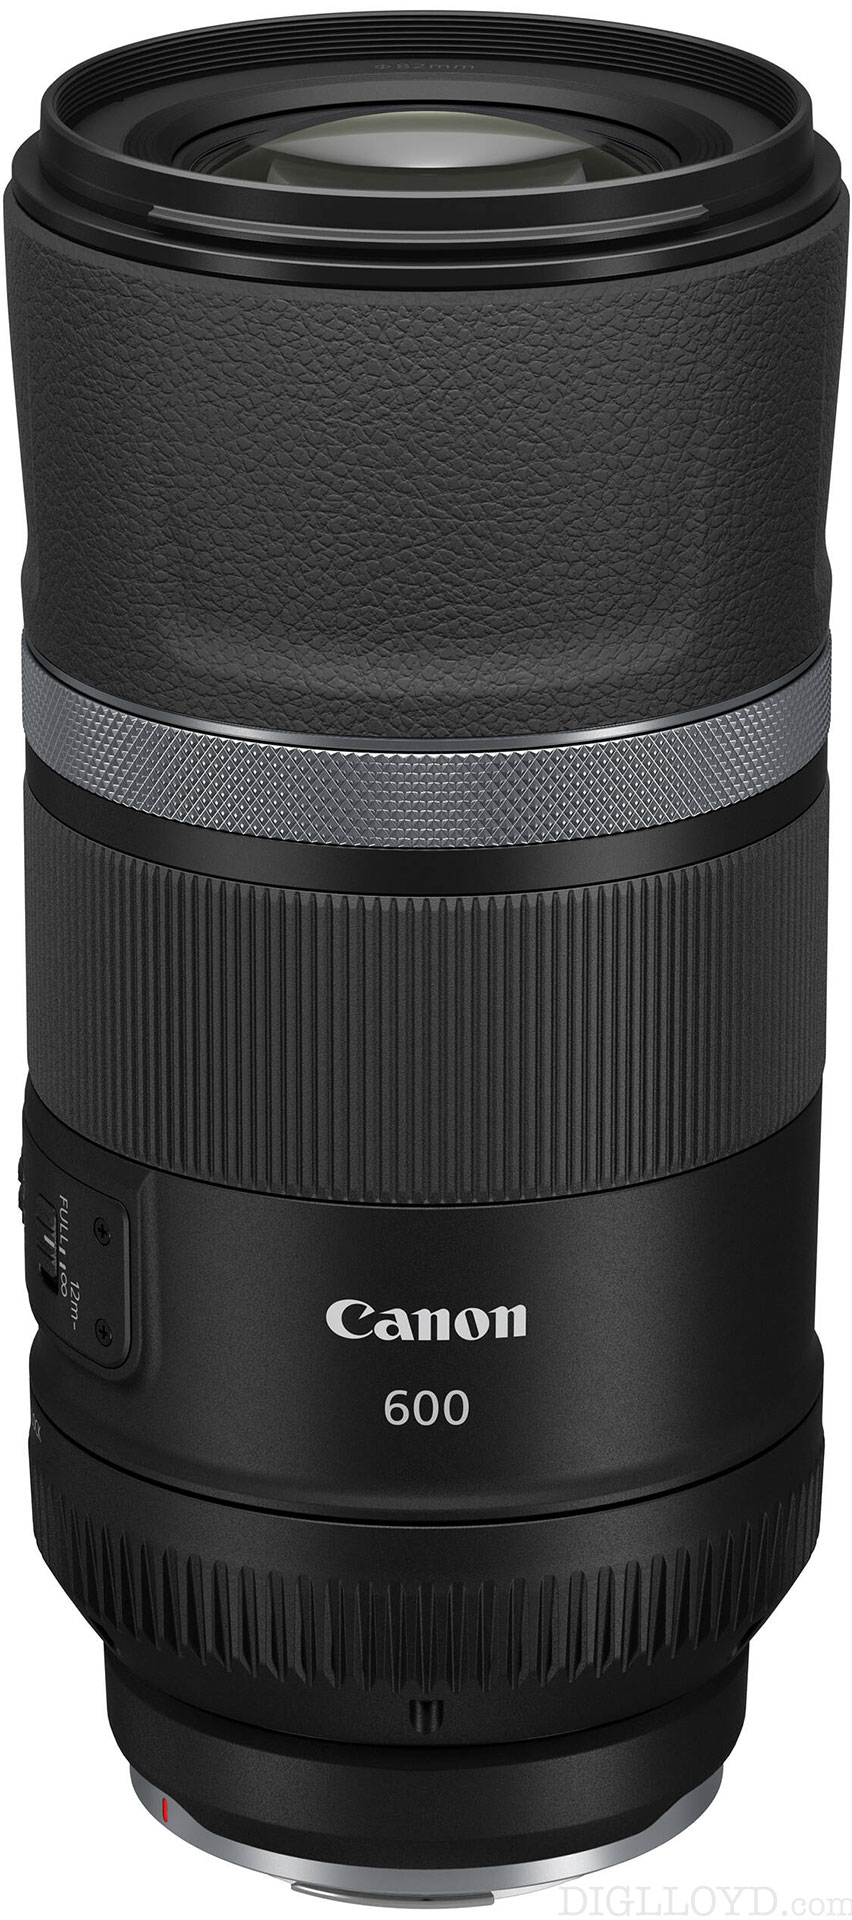 image of Canon RF 600mm f/11 IS STM